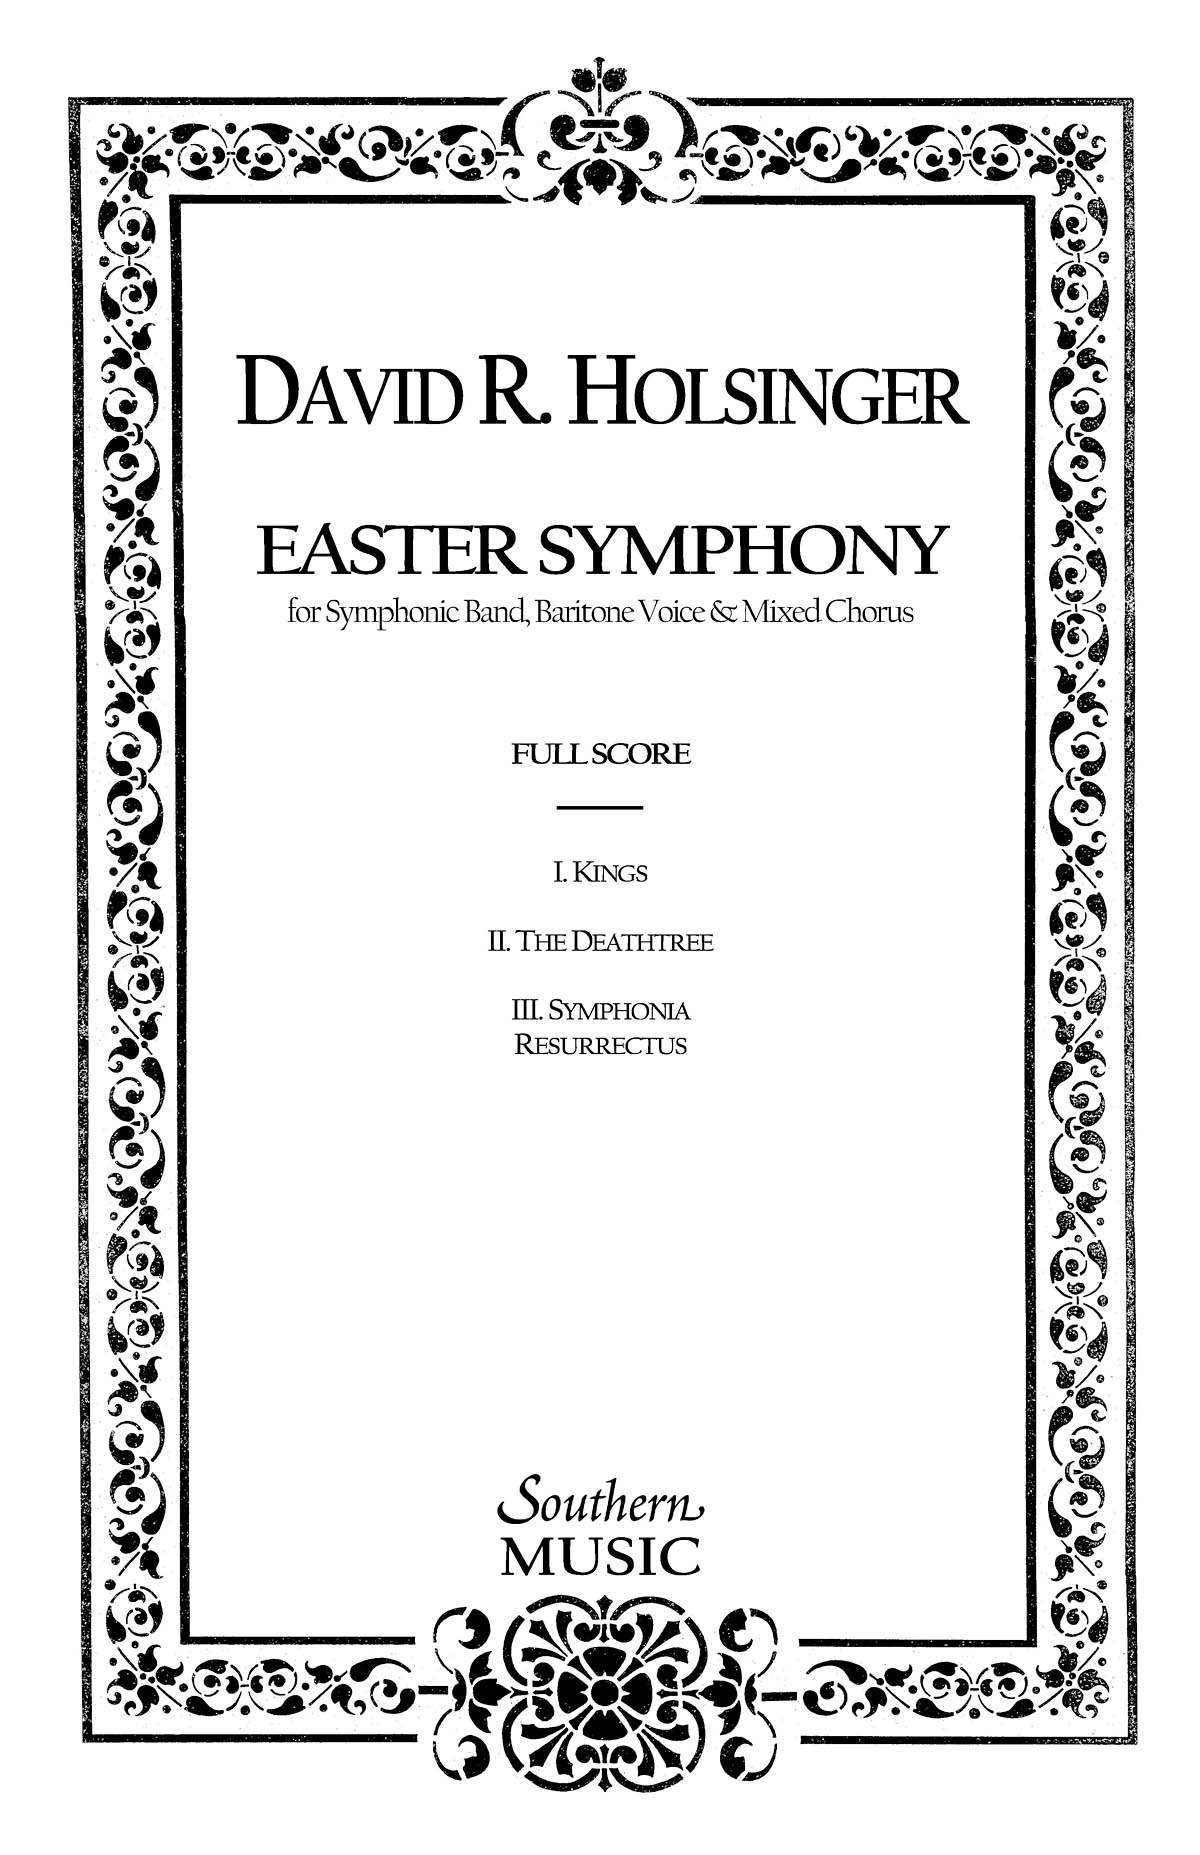 The Easter Symphony